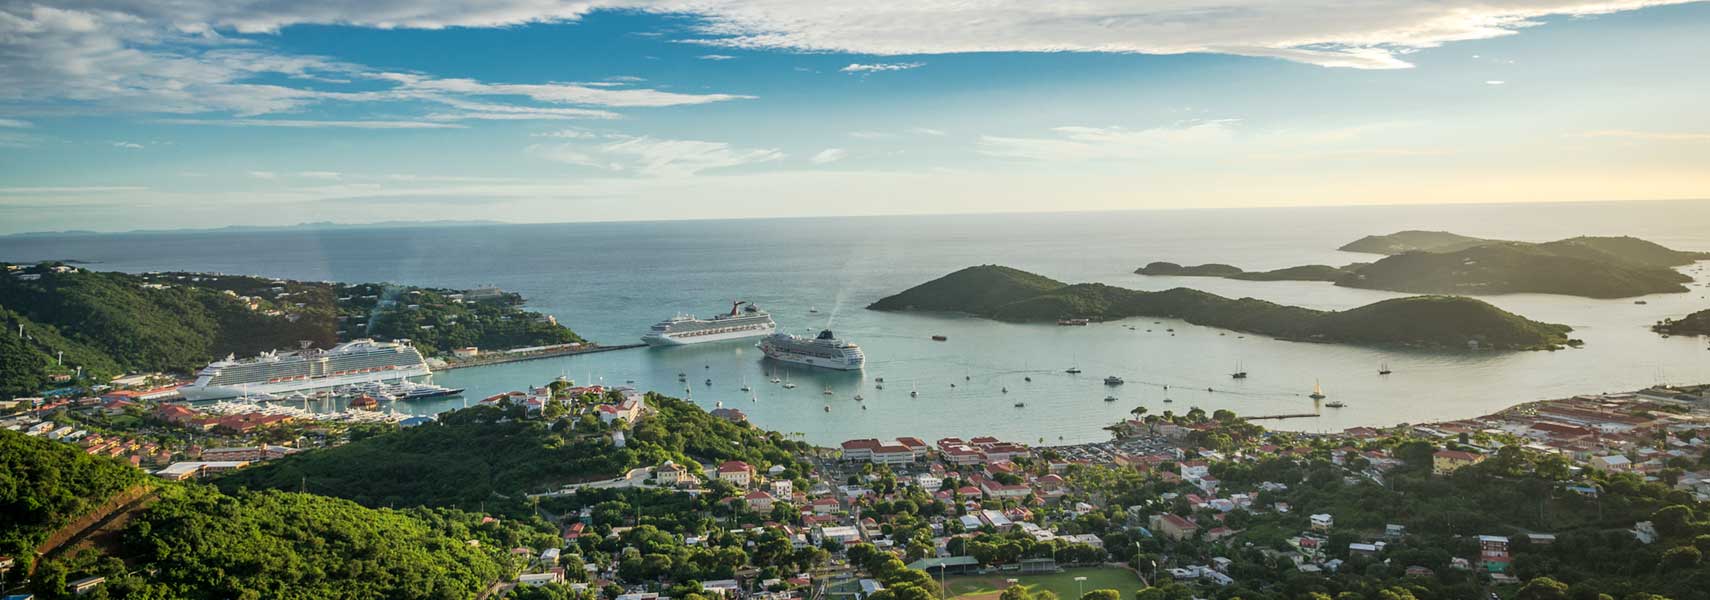 View of the Islands of St. Thomas, US Virgin Islands